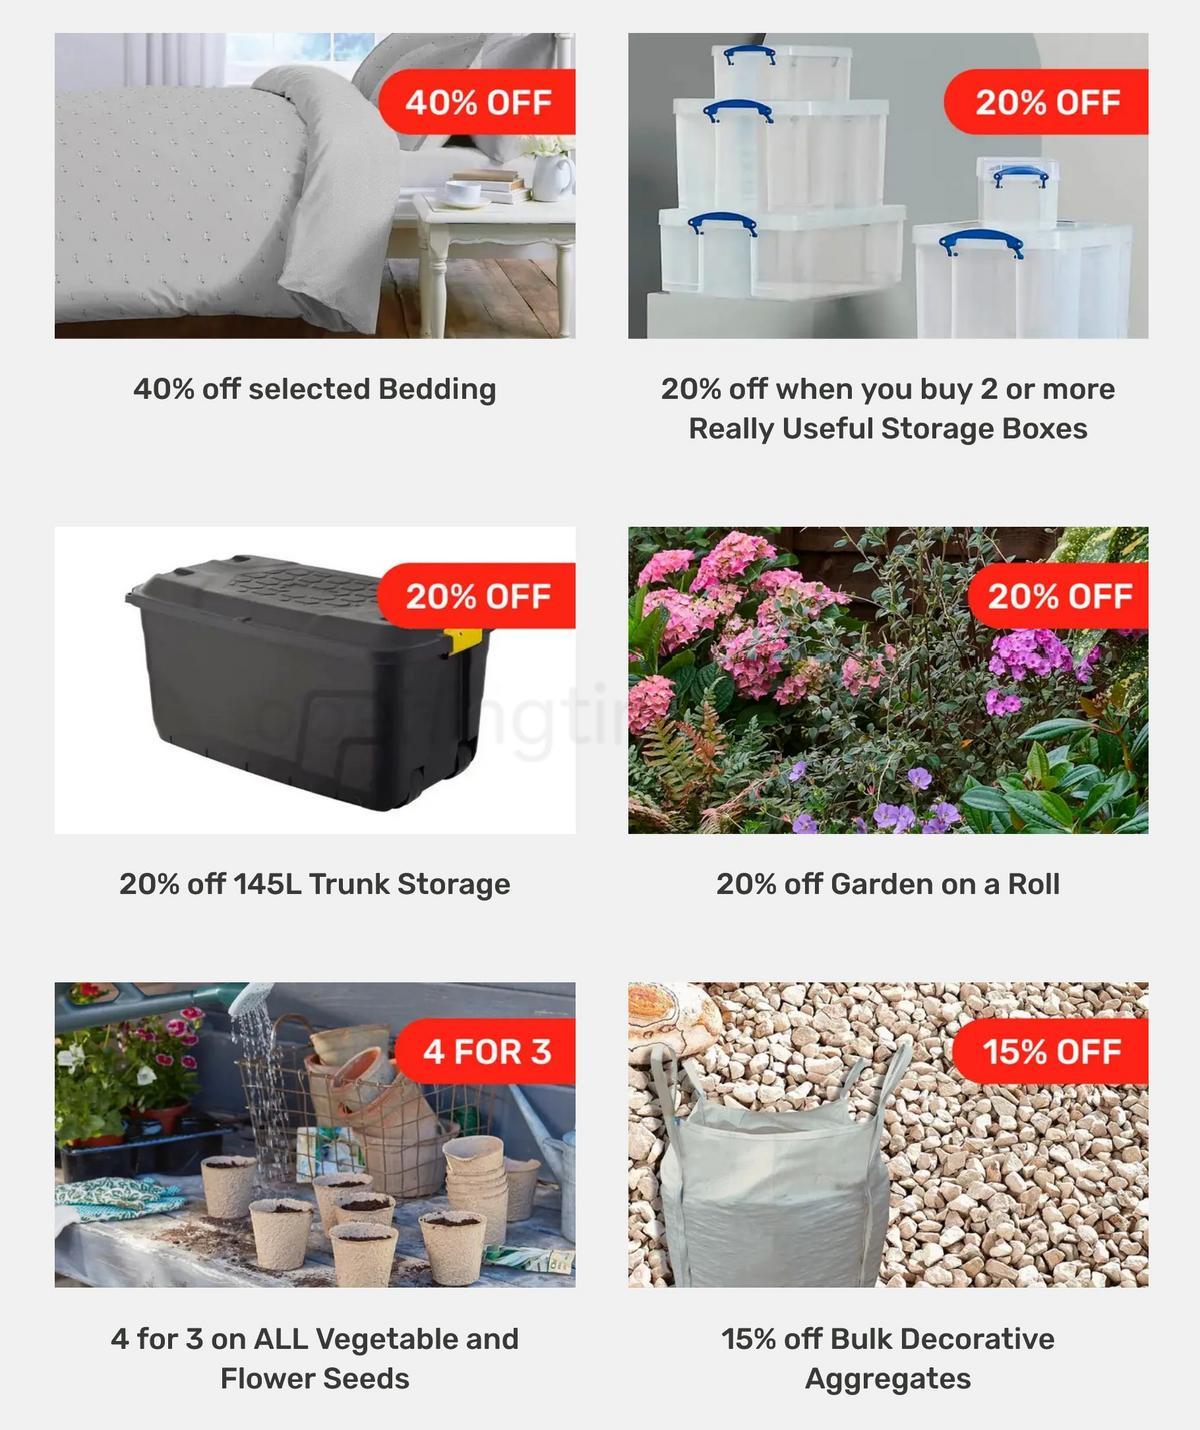 Homebase Offers from 1 April